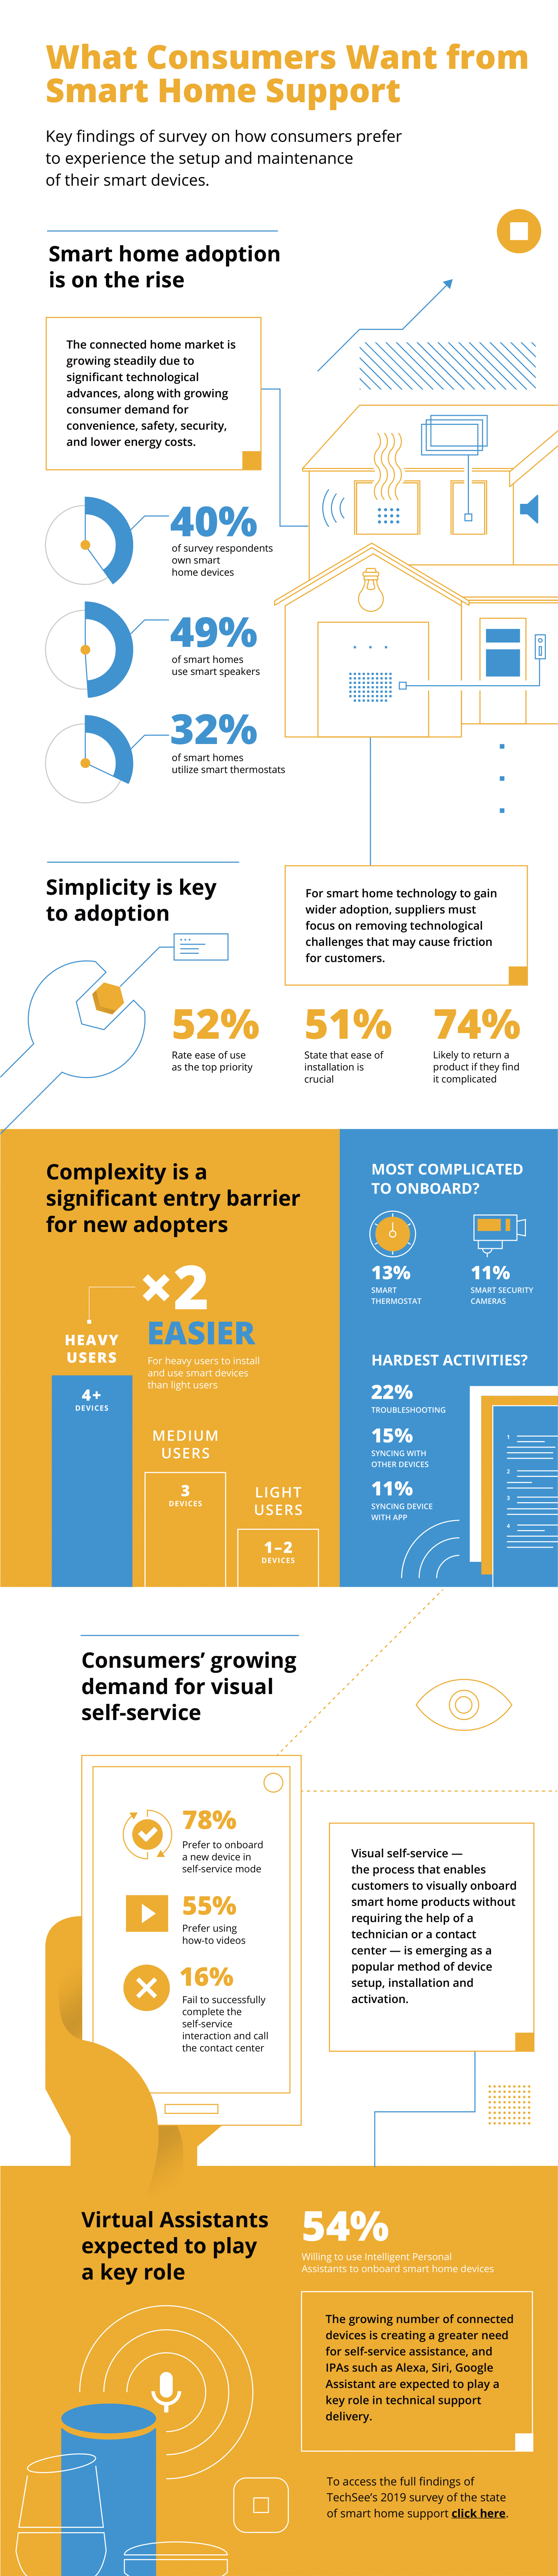 Smart Home Support Survey Infographic